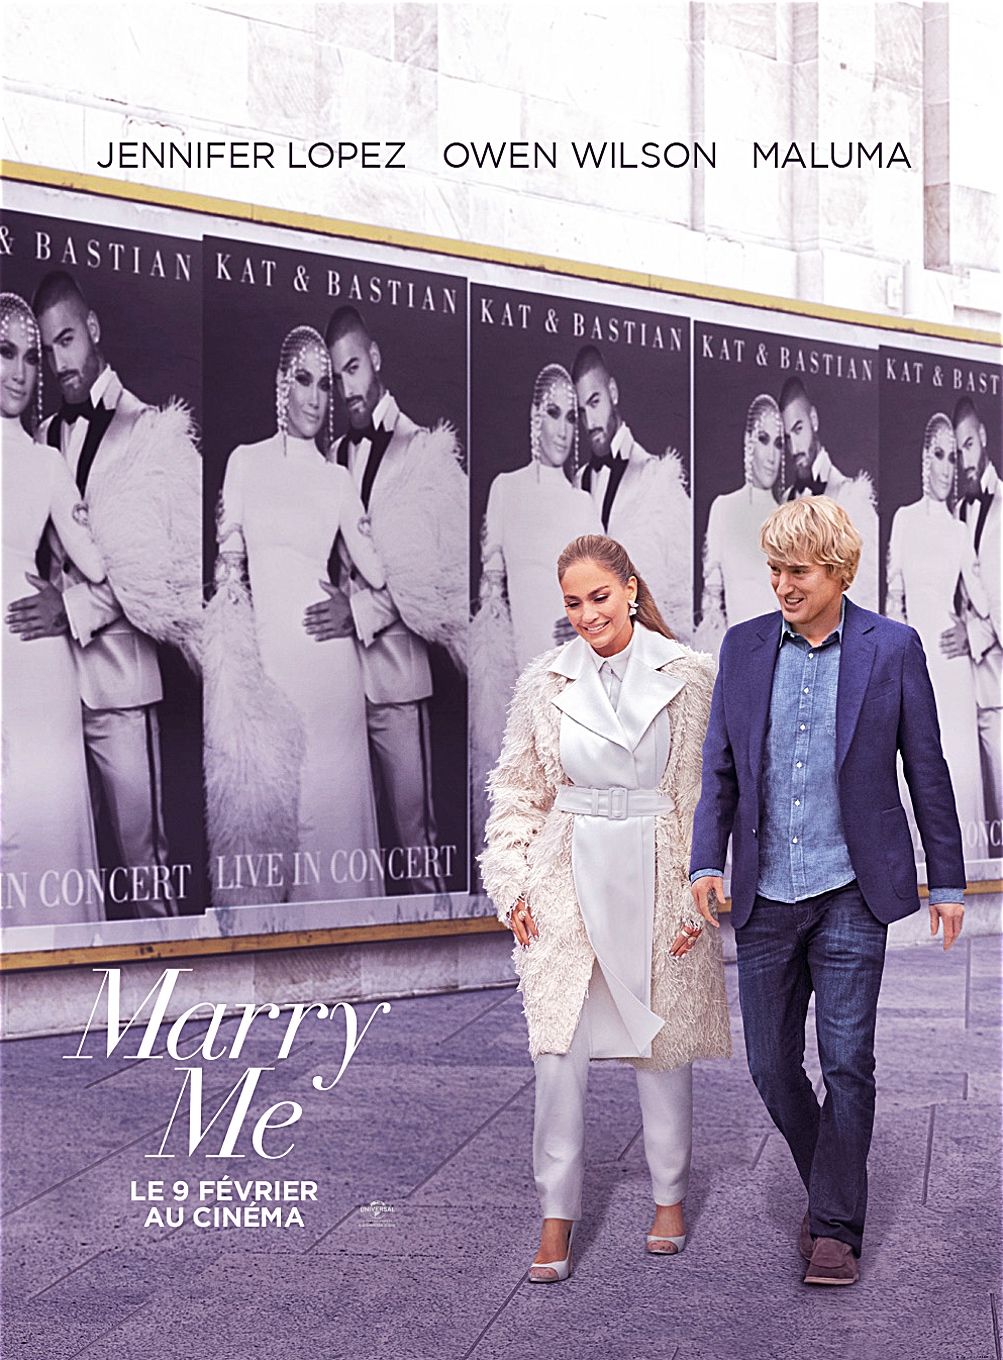 Marry Me - Film (2022) streaming VF gratuit complet